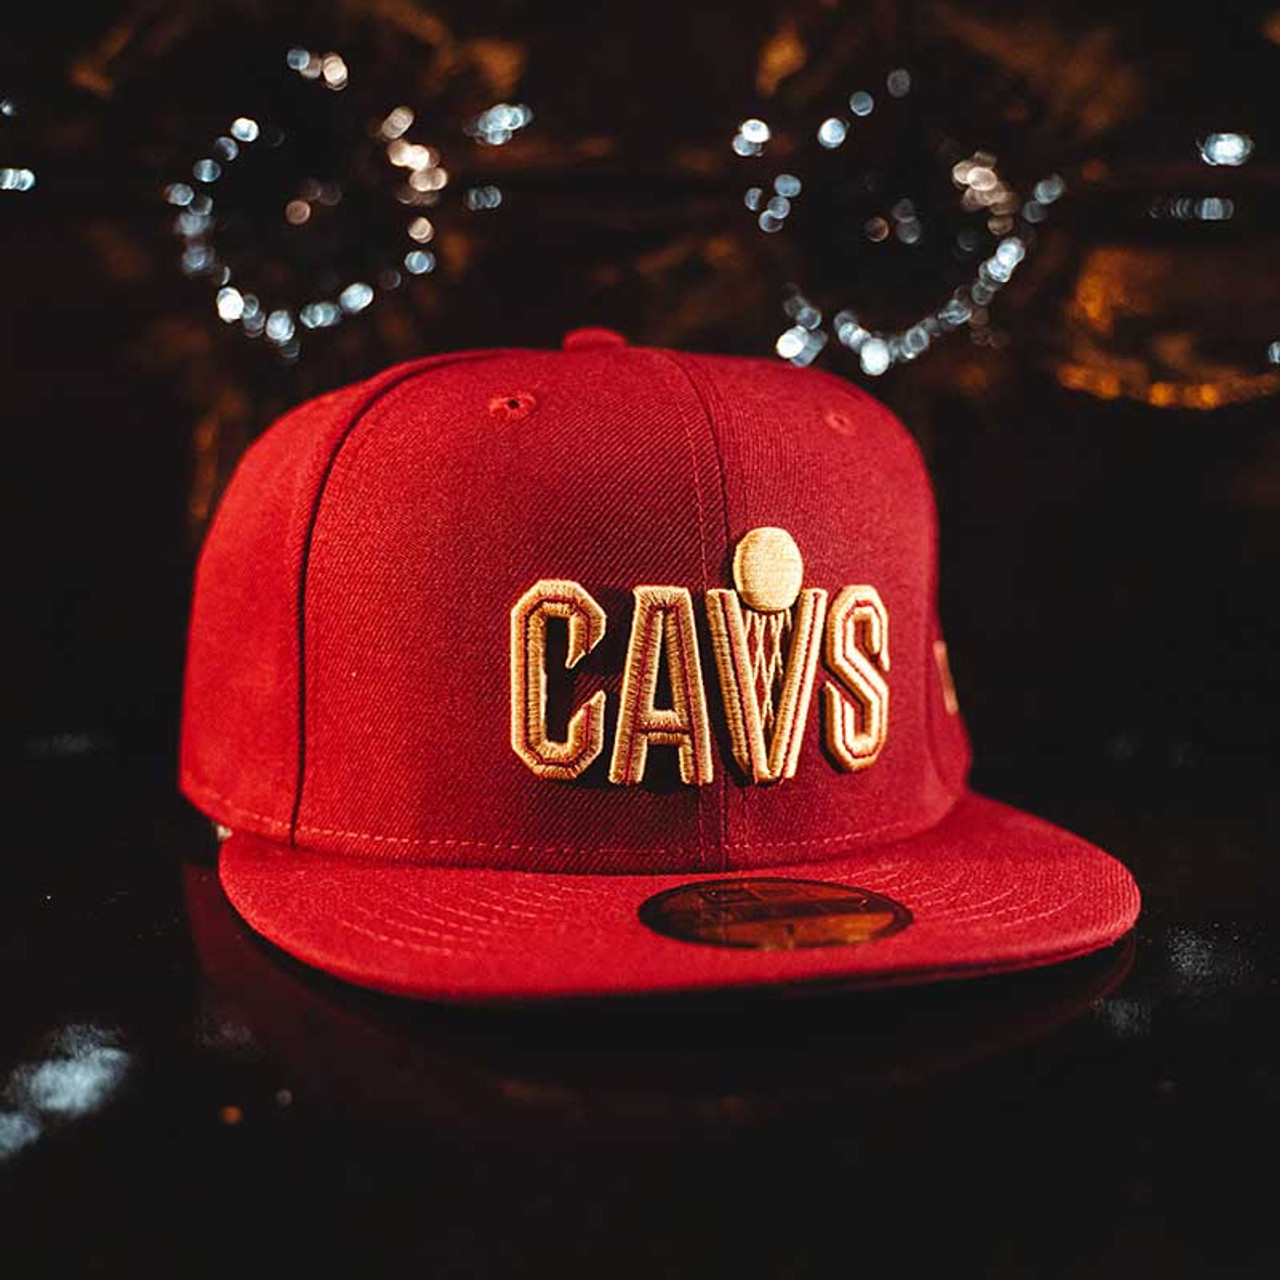 https://cdn11.bigcommerce.com/s-fqgrir1l2j/images/stencil/1280x1280/products/5079/6646/Wine-new-cavs-9fifty-fitted-hat__80800.1657137444.jpg?c=2